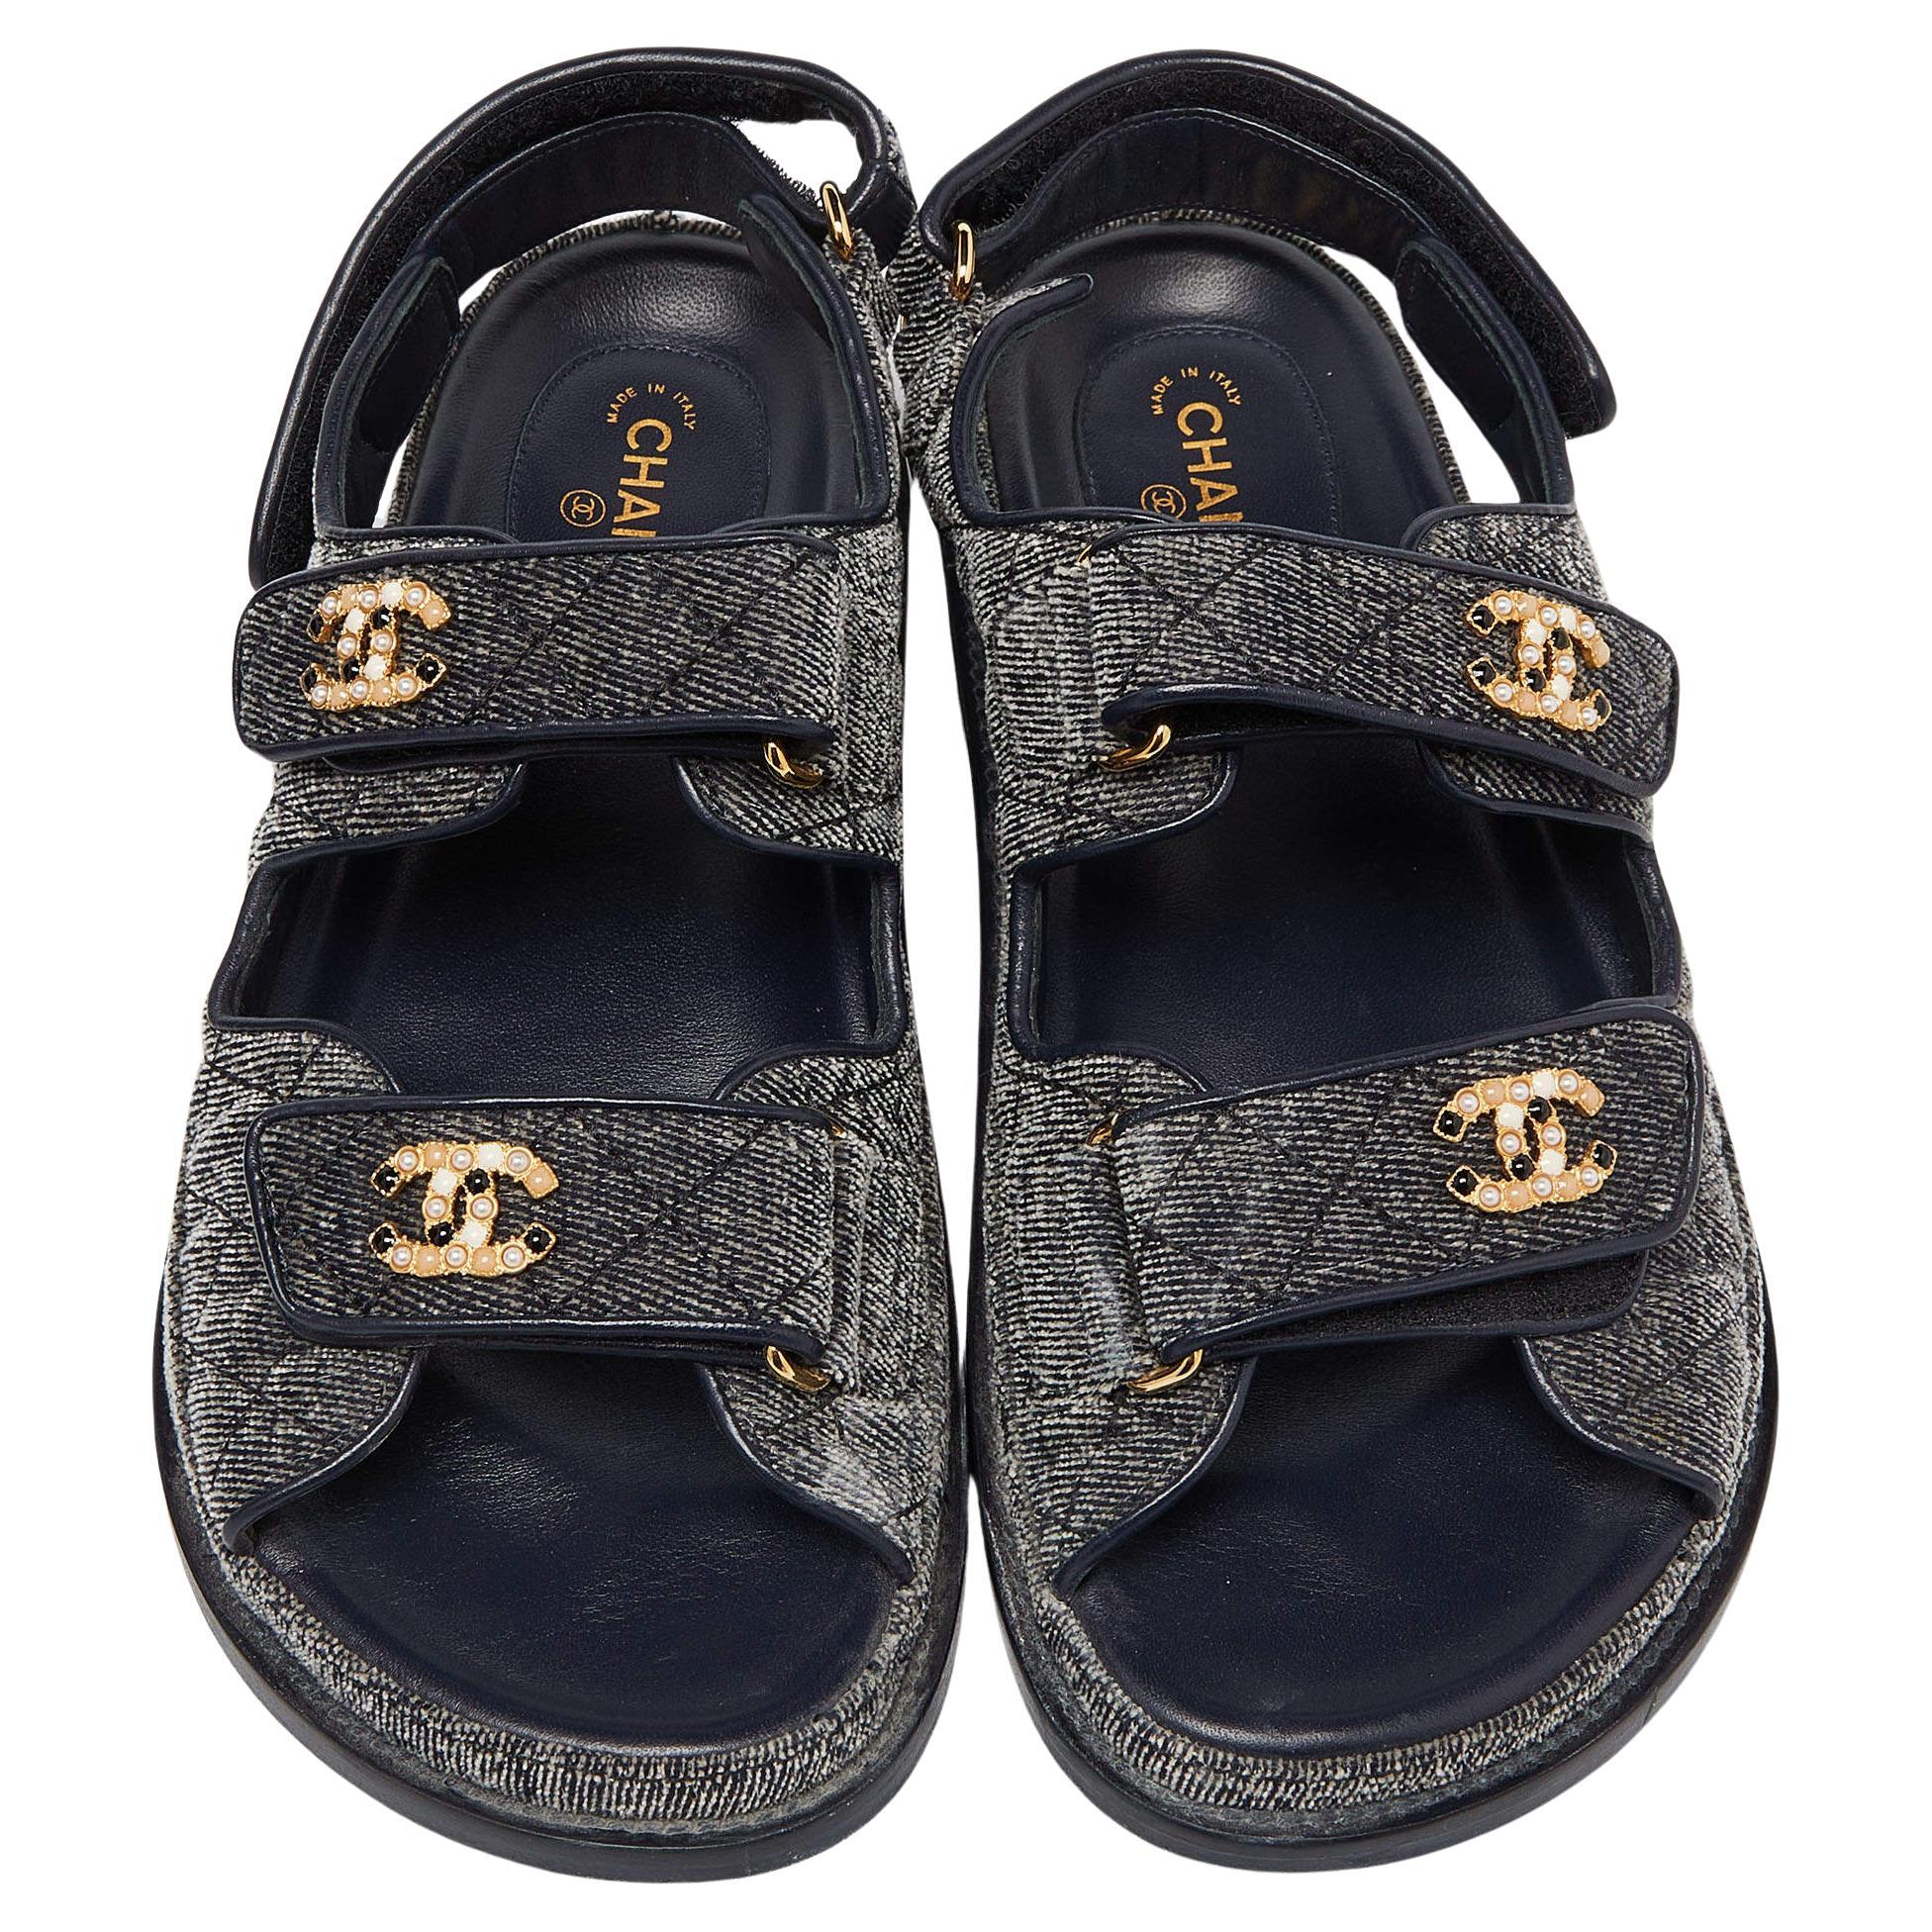 What are dad sandals called?